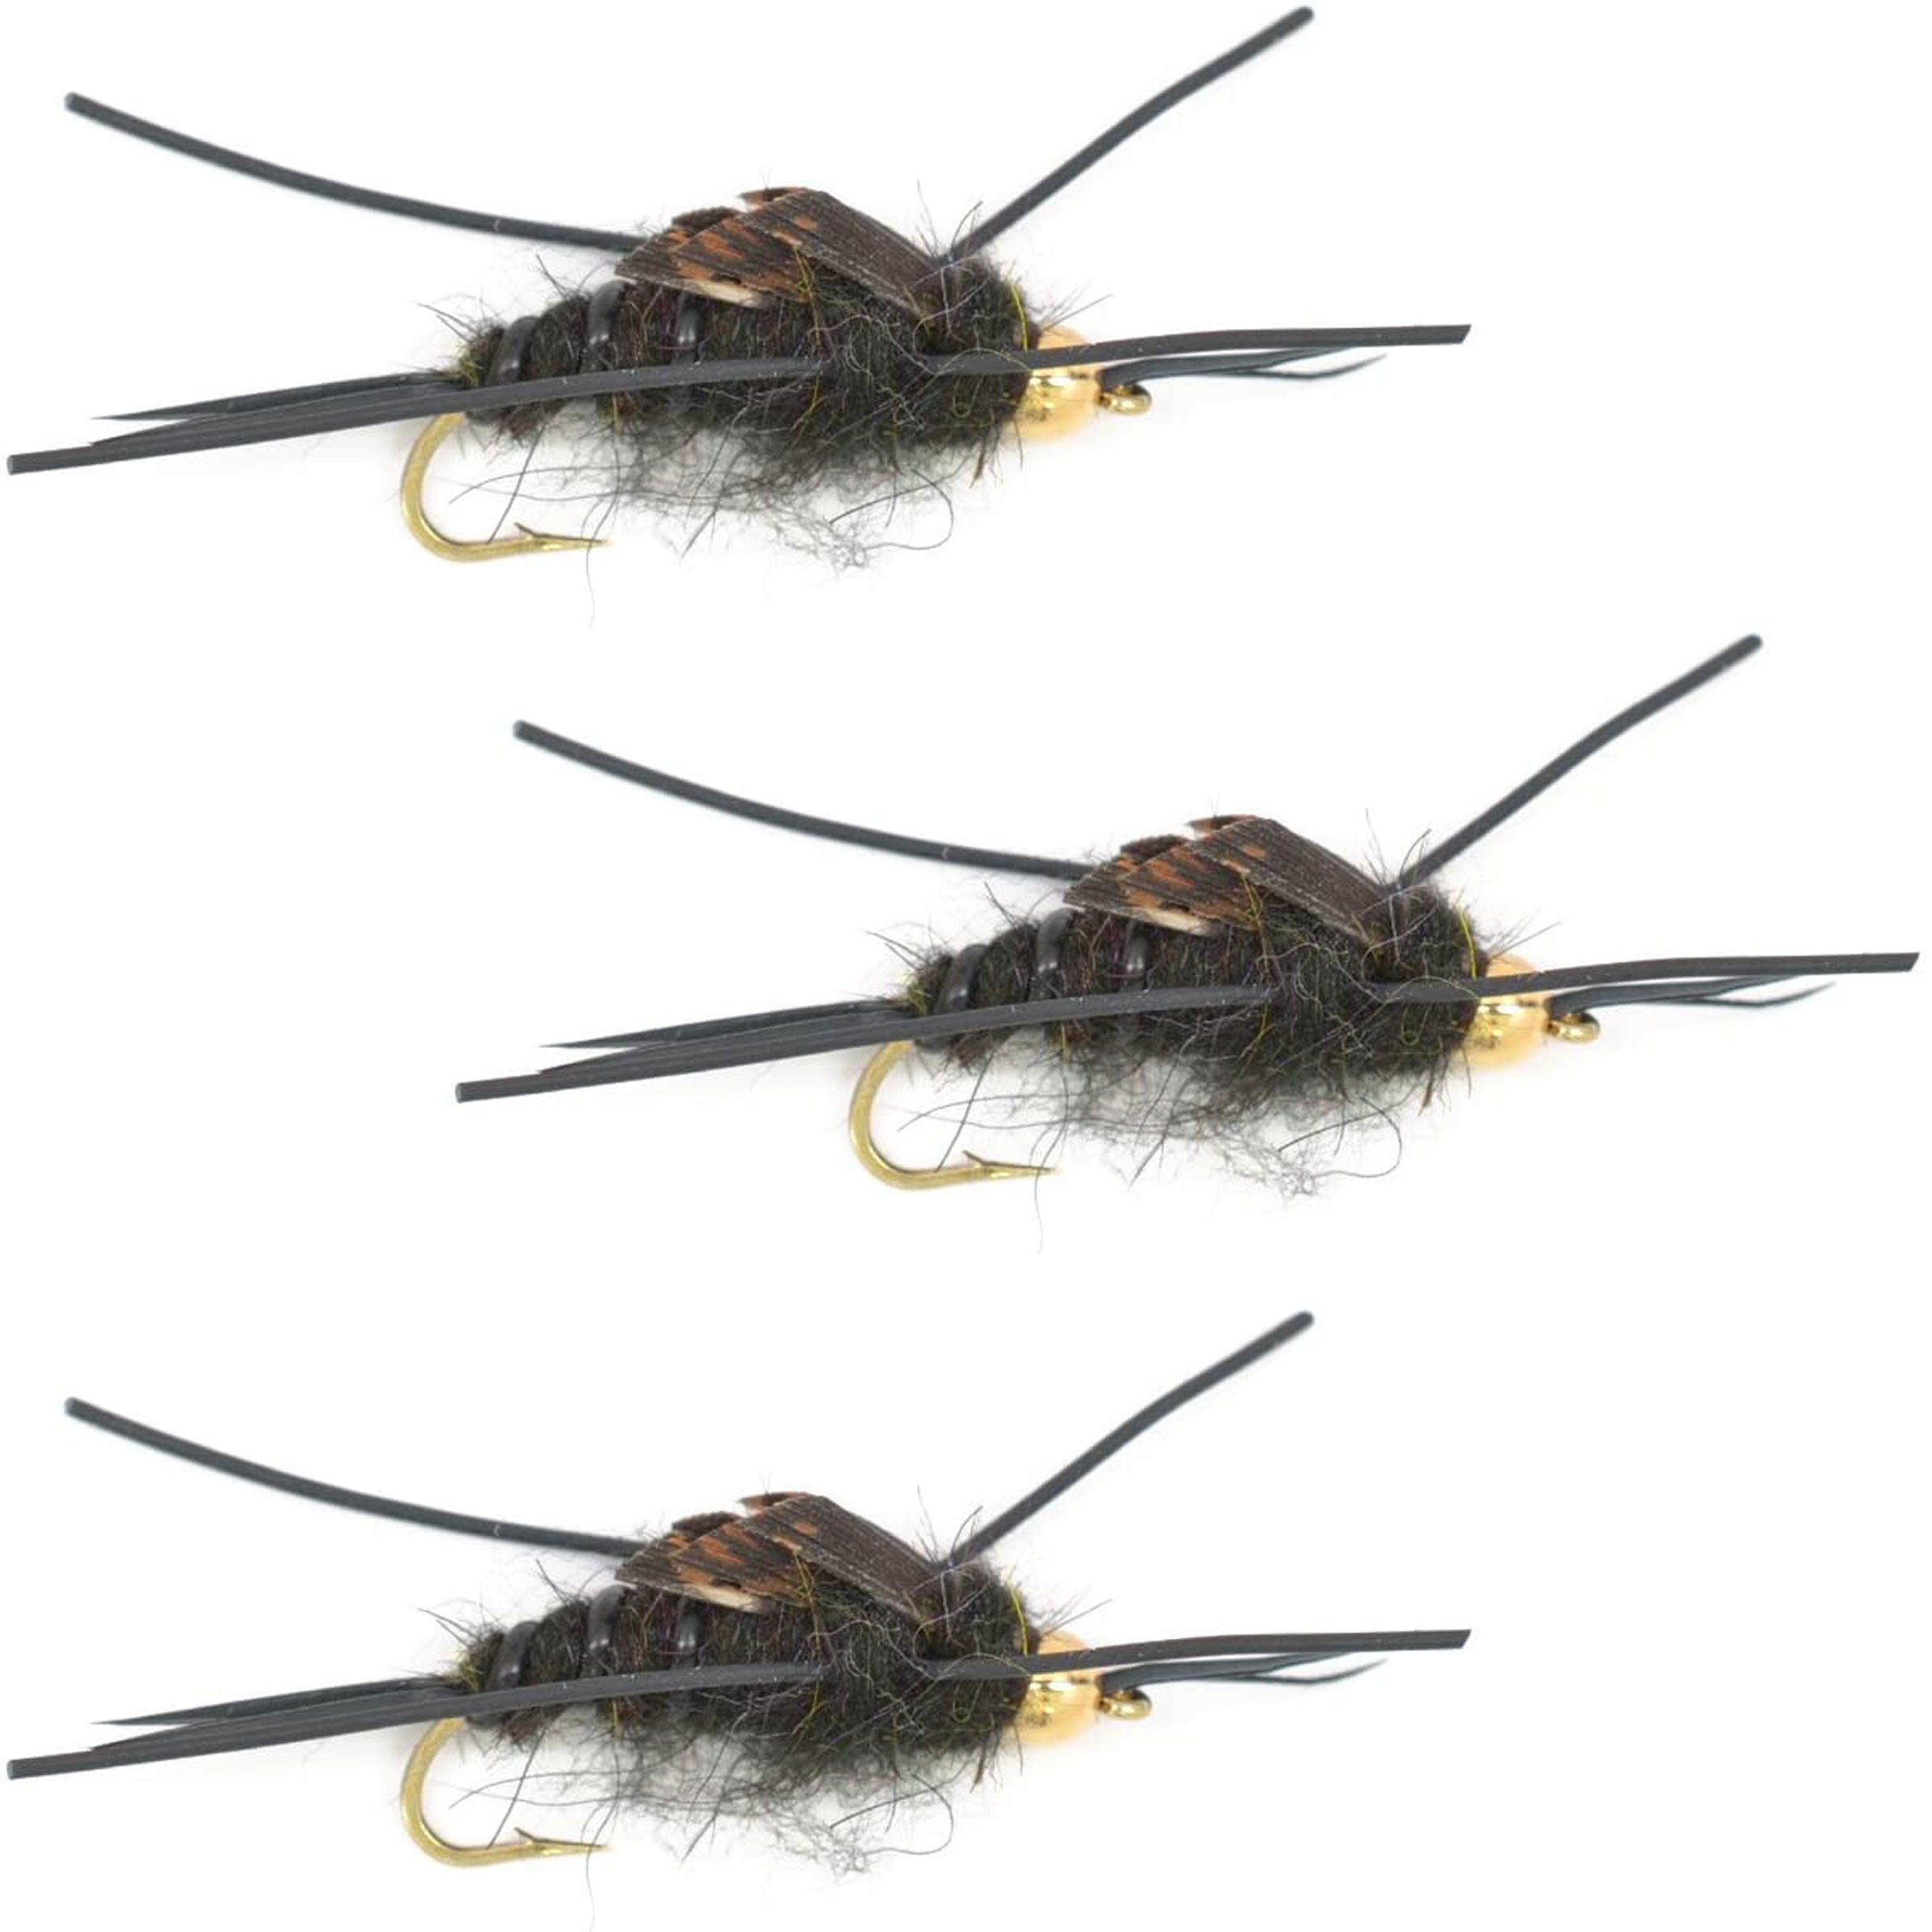 3 Pack Tungsten Bead Kaufmann's Black Stone Fly with Rubber Legs - Stonefly Wet Fly - Hook Size 10